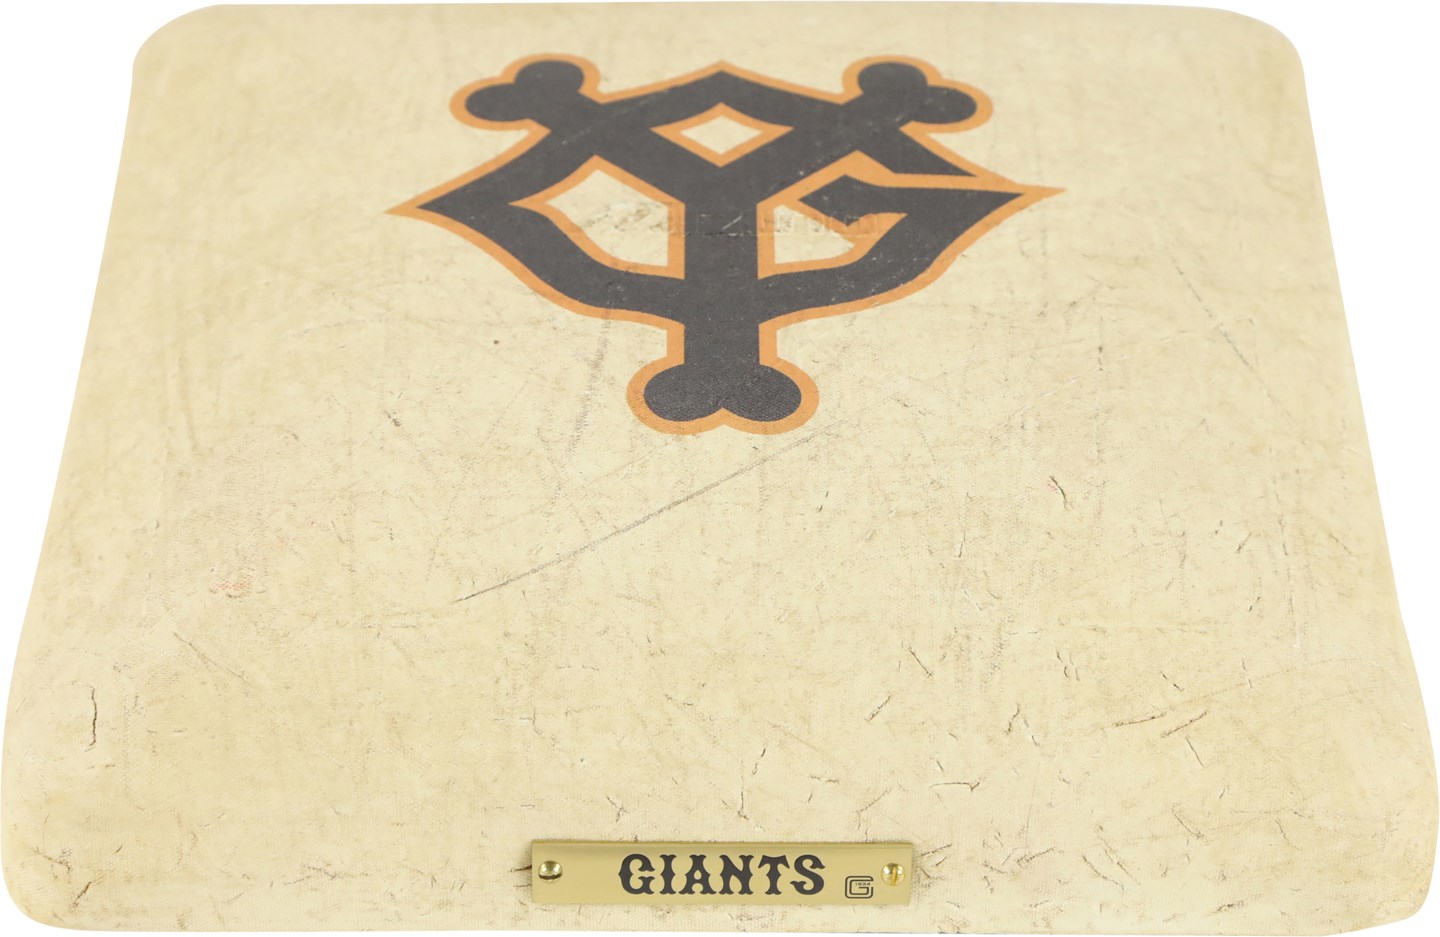 Baseball Equipment - 2015 Yomiuri Giants Game Used Tokyo Dome Base (1 of Only 7 Sold)